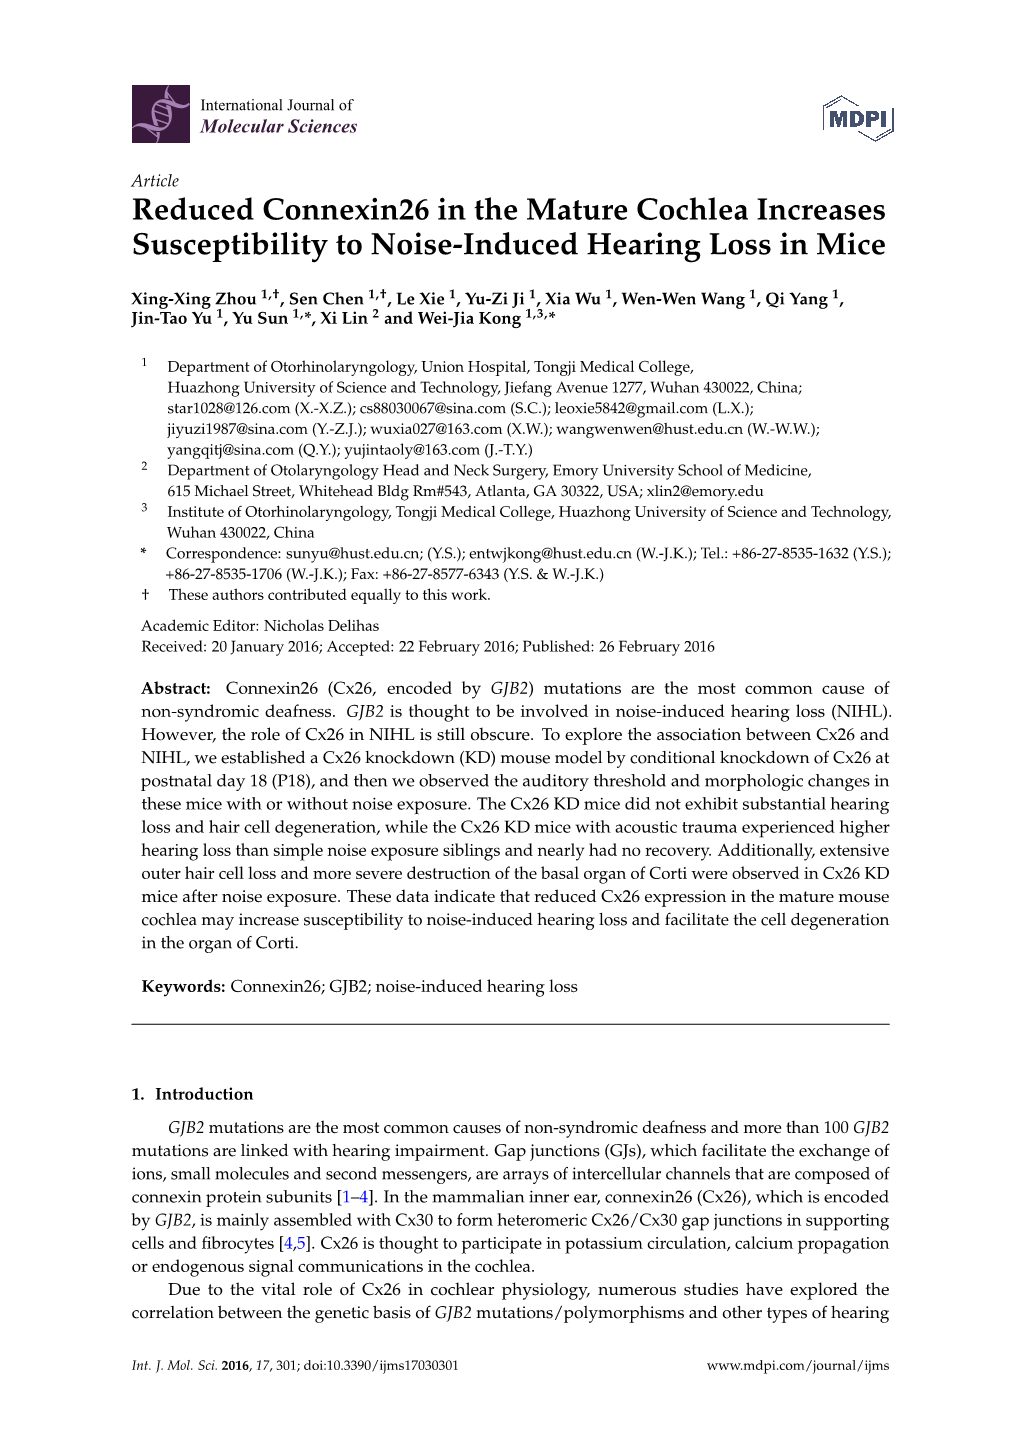 Reduced Connexin26 in the Mature Cochlea Increases Susceptibility to Noise-Induced Hearing Loss in Mice